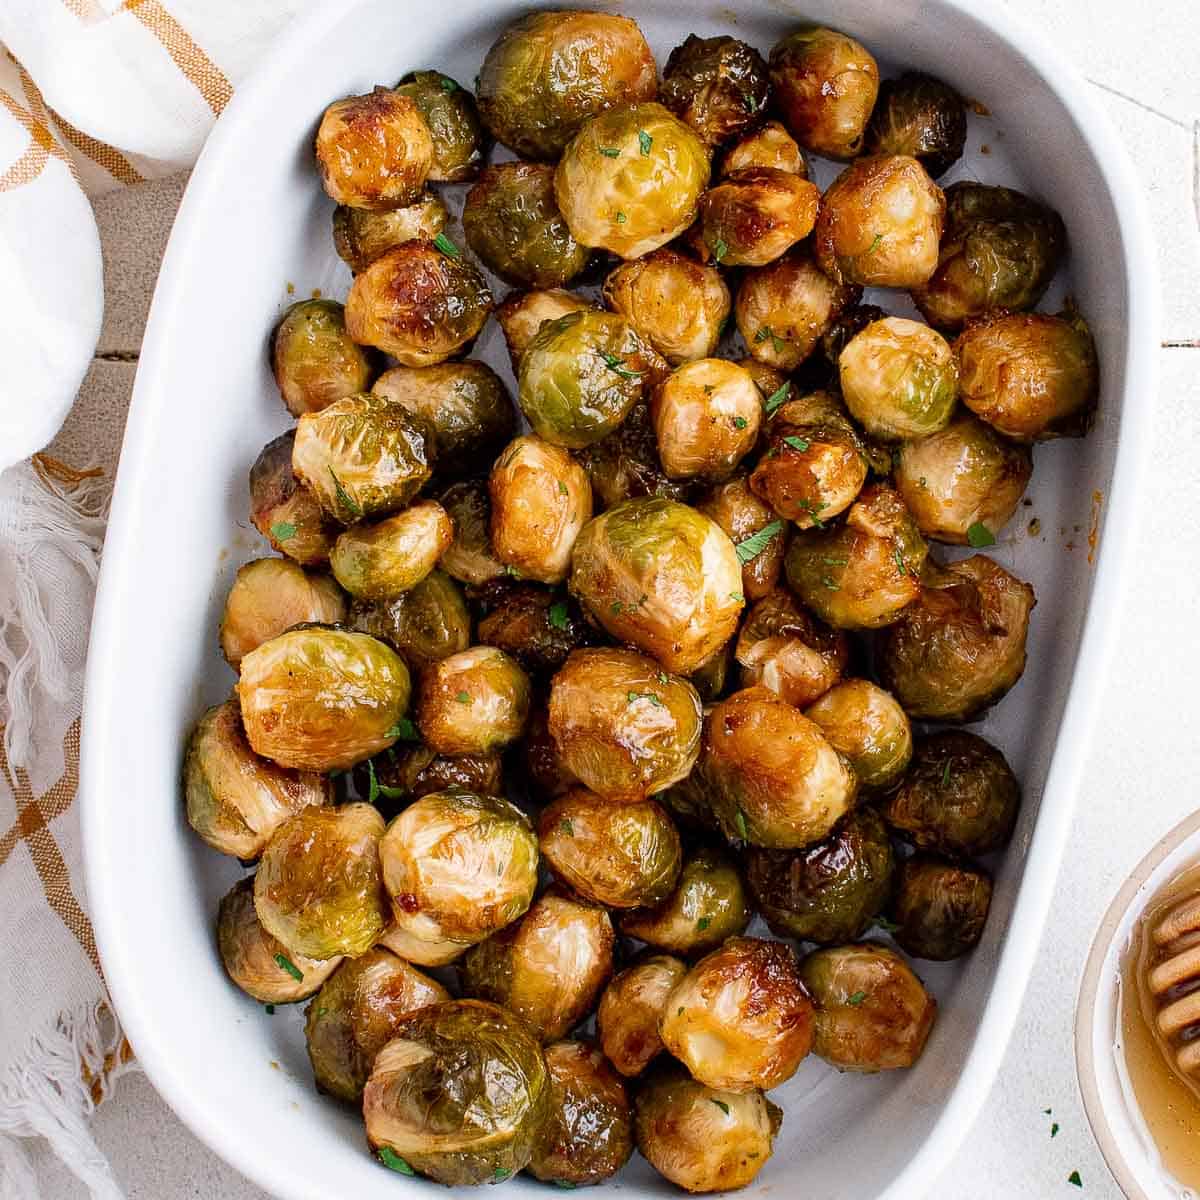 Honey sriracha brussels sprouts